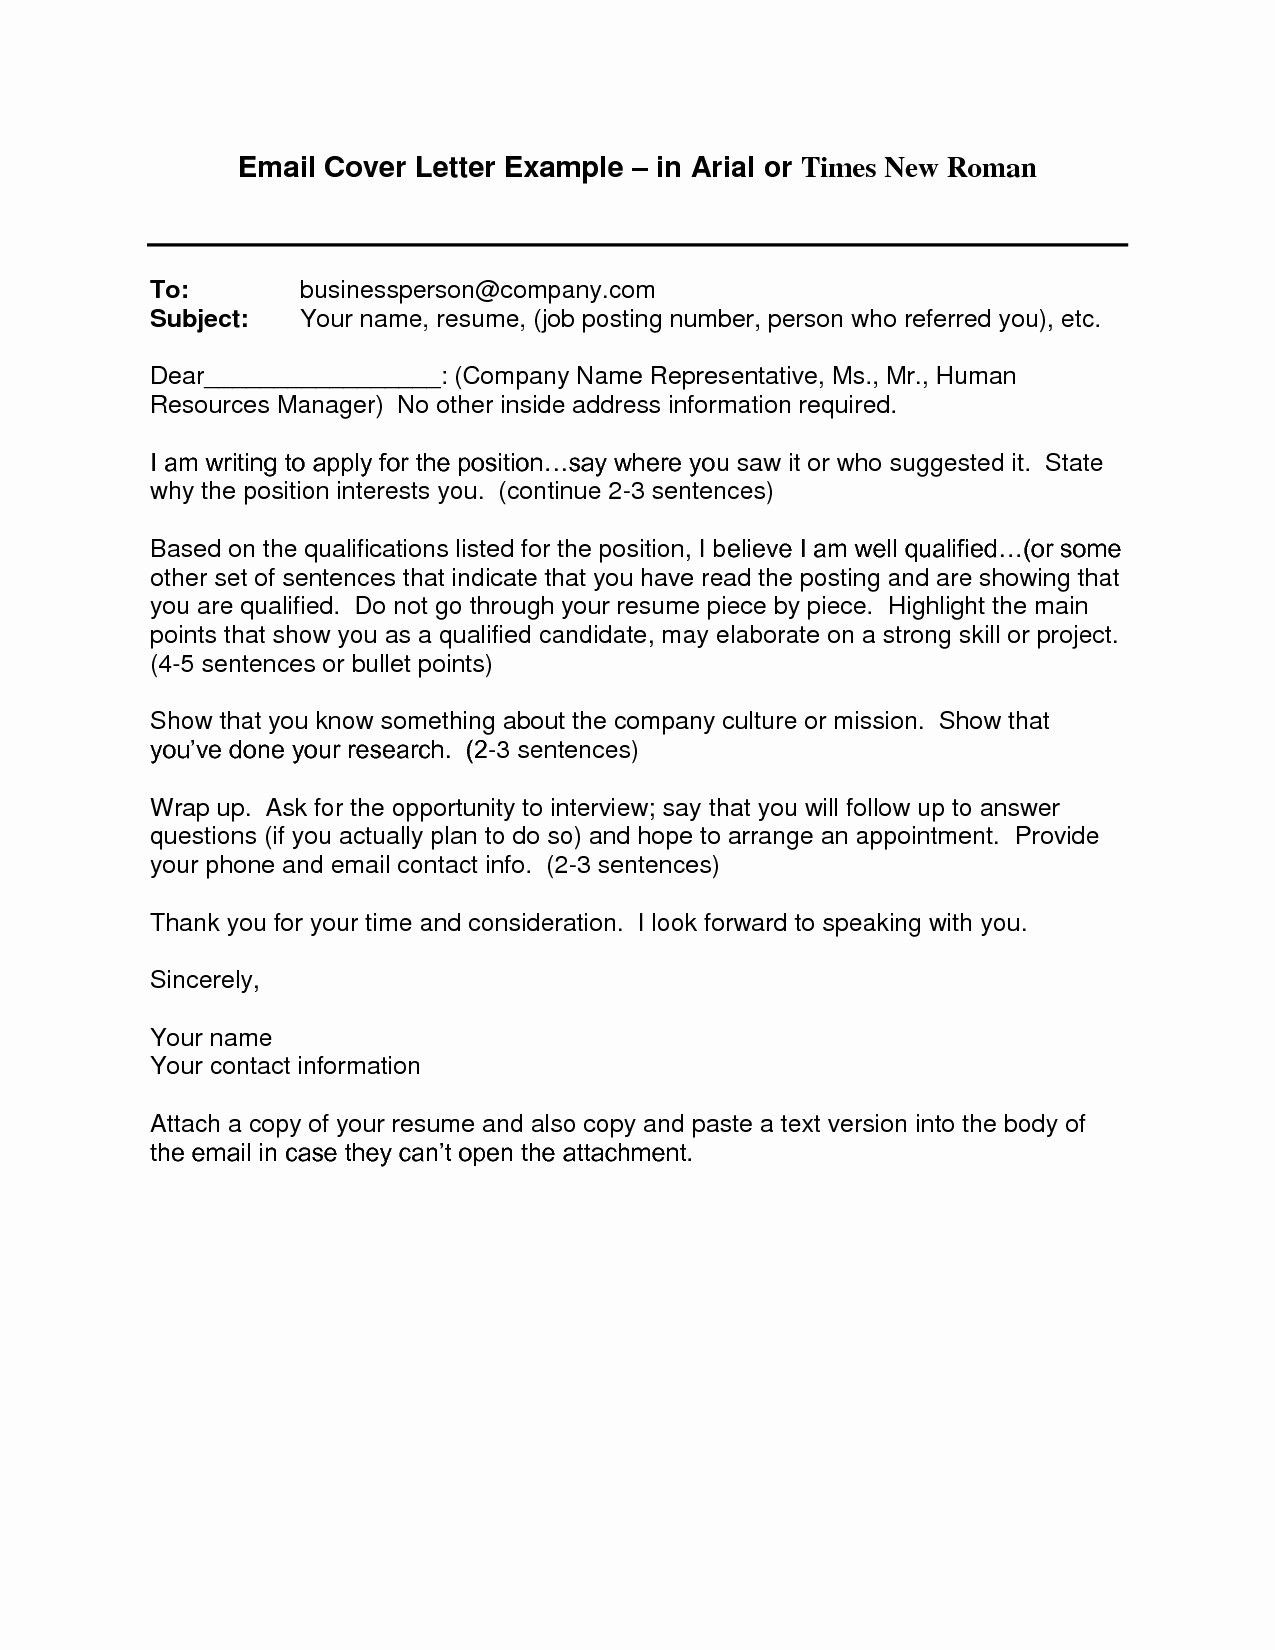 Sample Of Cover Letter for Resume Via Email Sample Email with Resume attached – Good Resume Examples